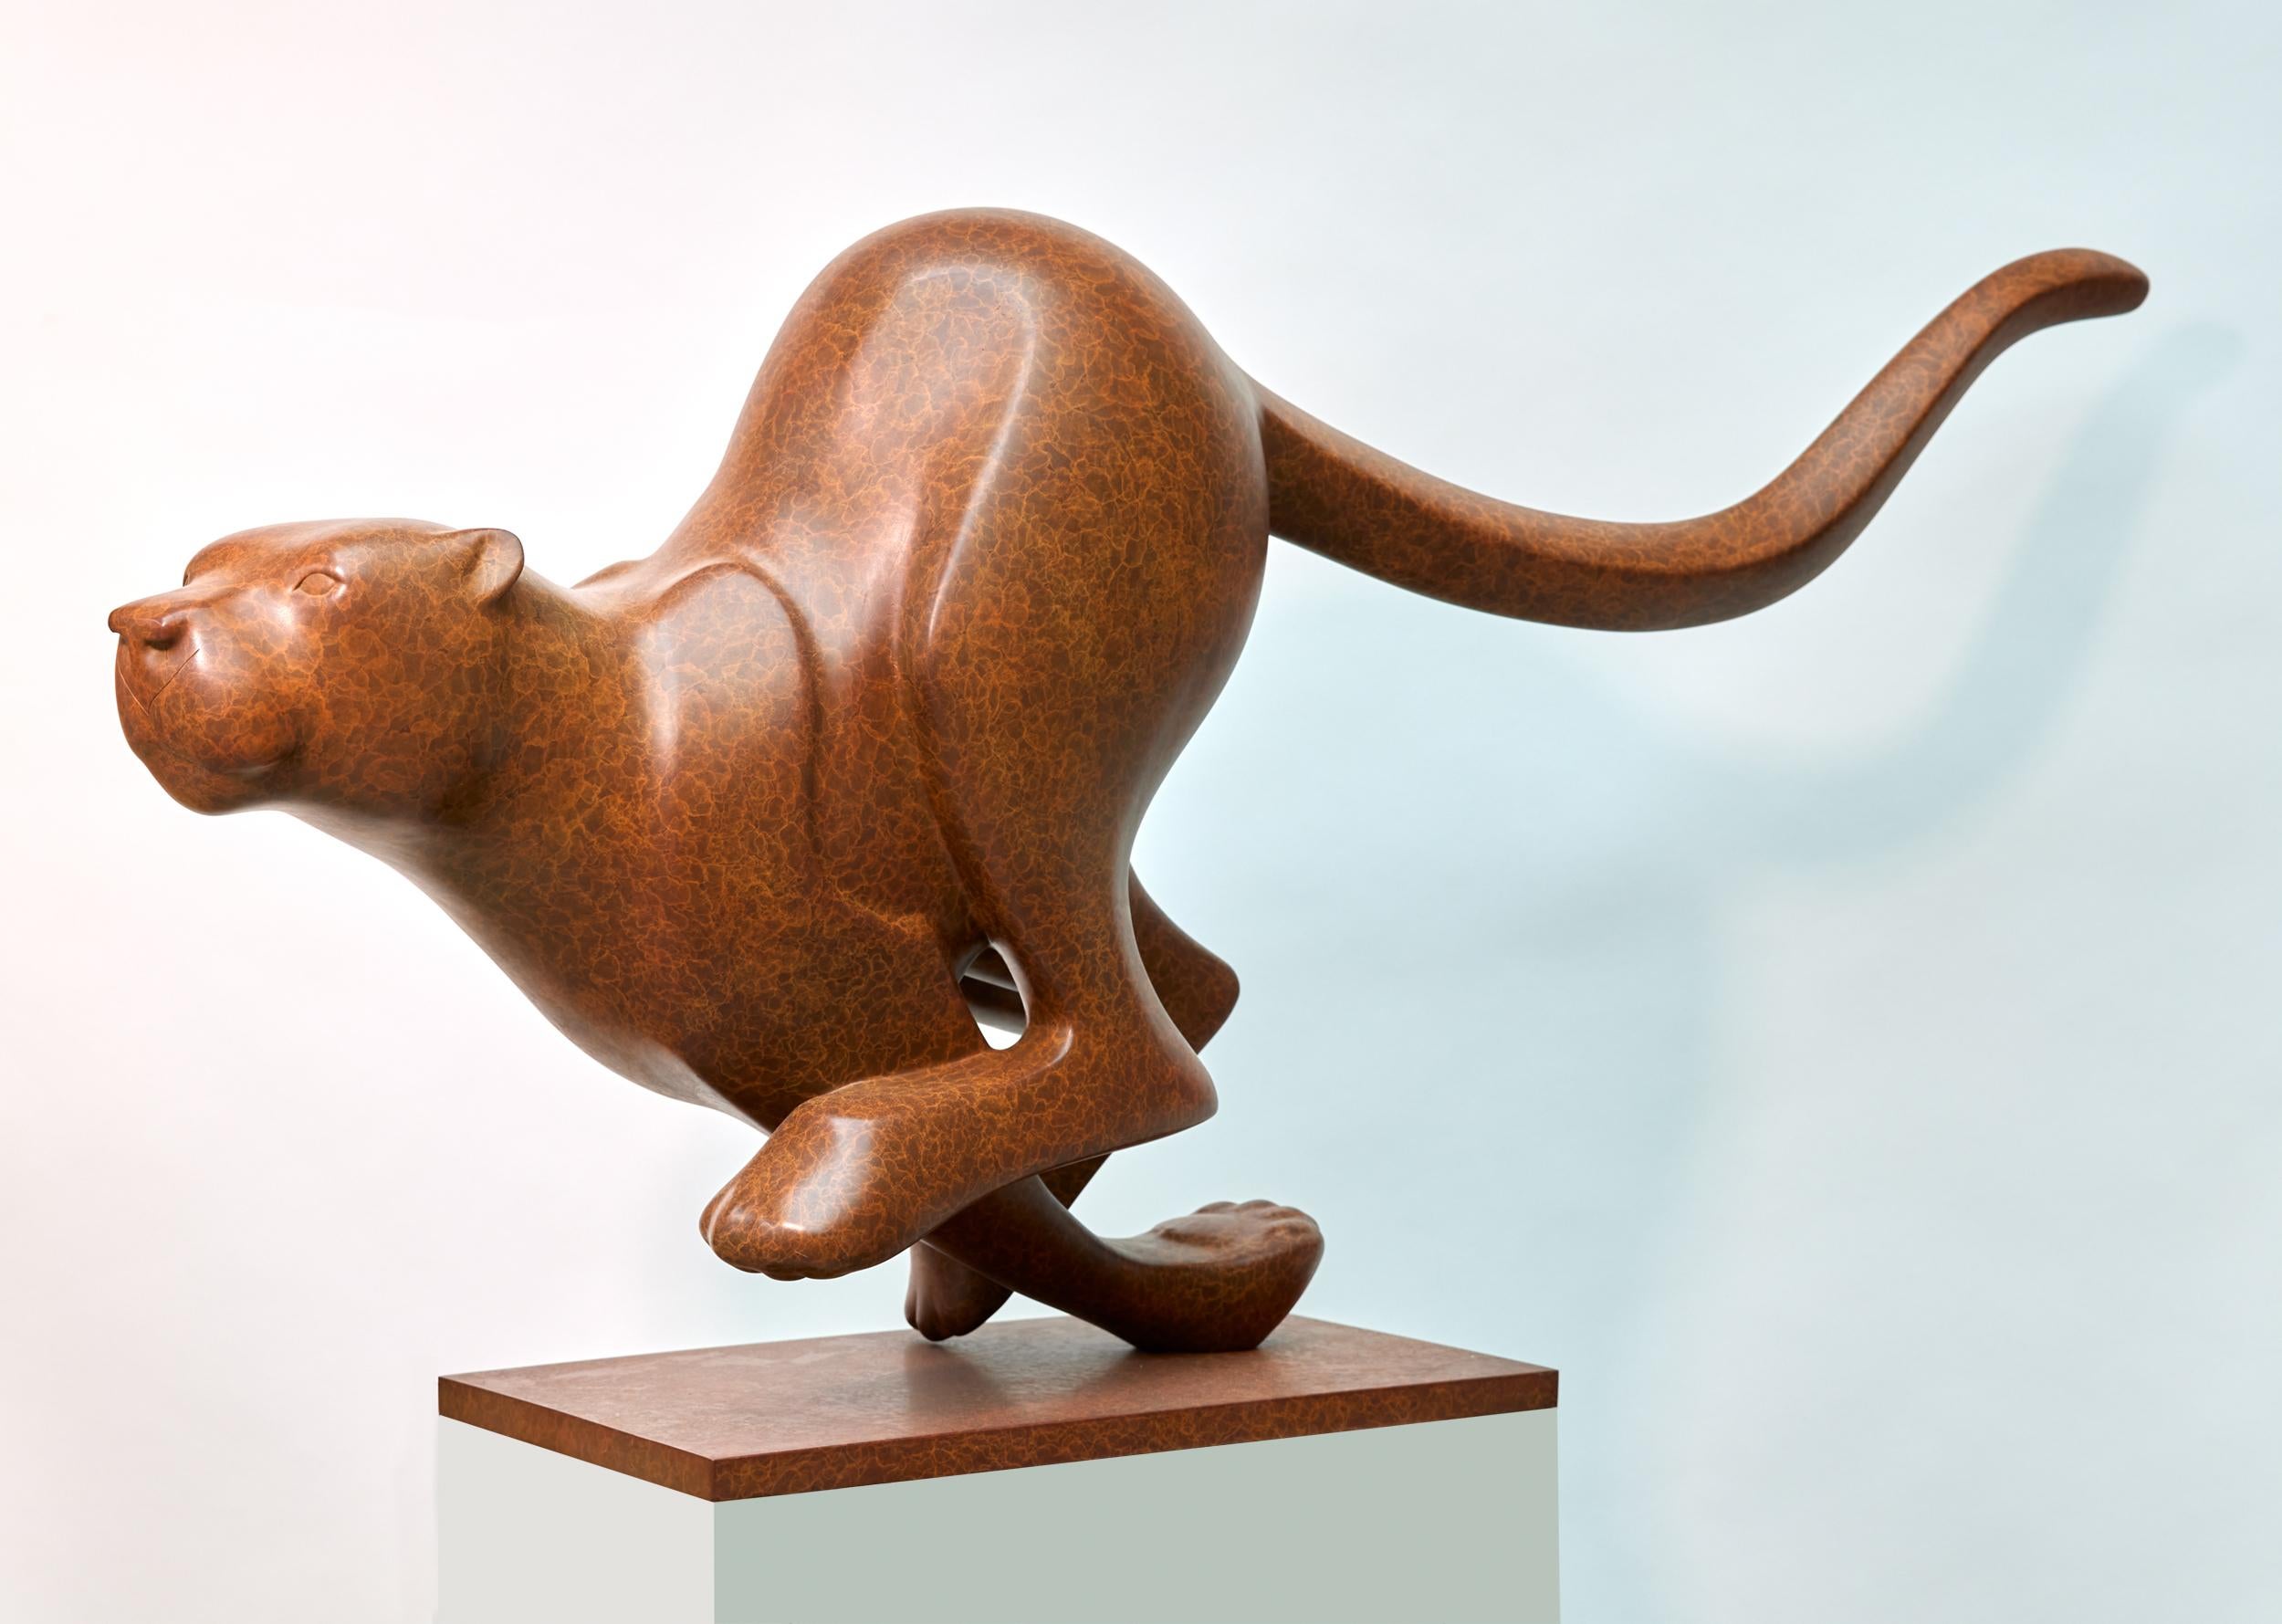 Rennende Poema no. 2 Running Cougar Bronze Sculpture Patin Limited Edition

Evert den Hartog (born in Groot-Ammers, The Netherlands in 1949) followed his education to be a sculptor at the Rotterdam Academy of Visual Arts. In the years 1971-1976 his